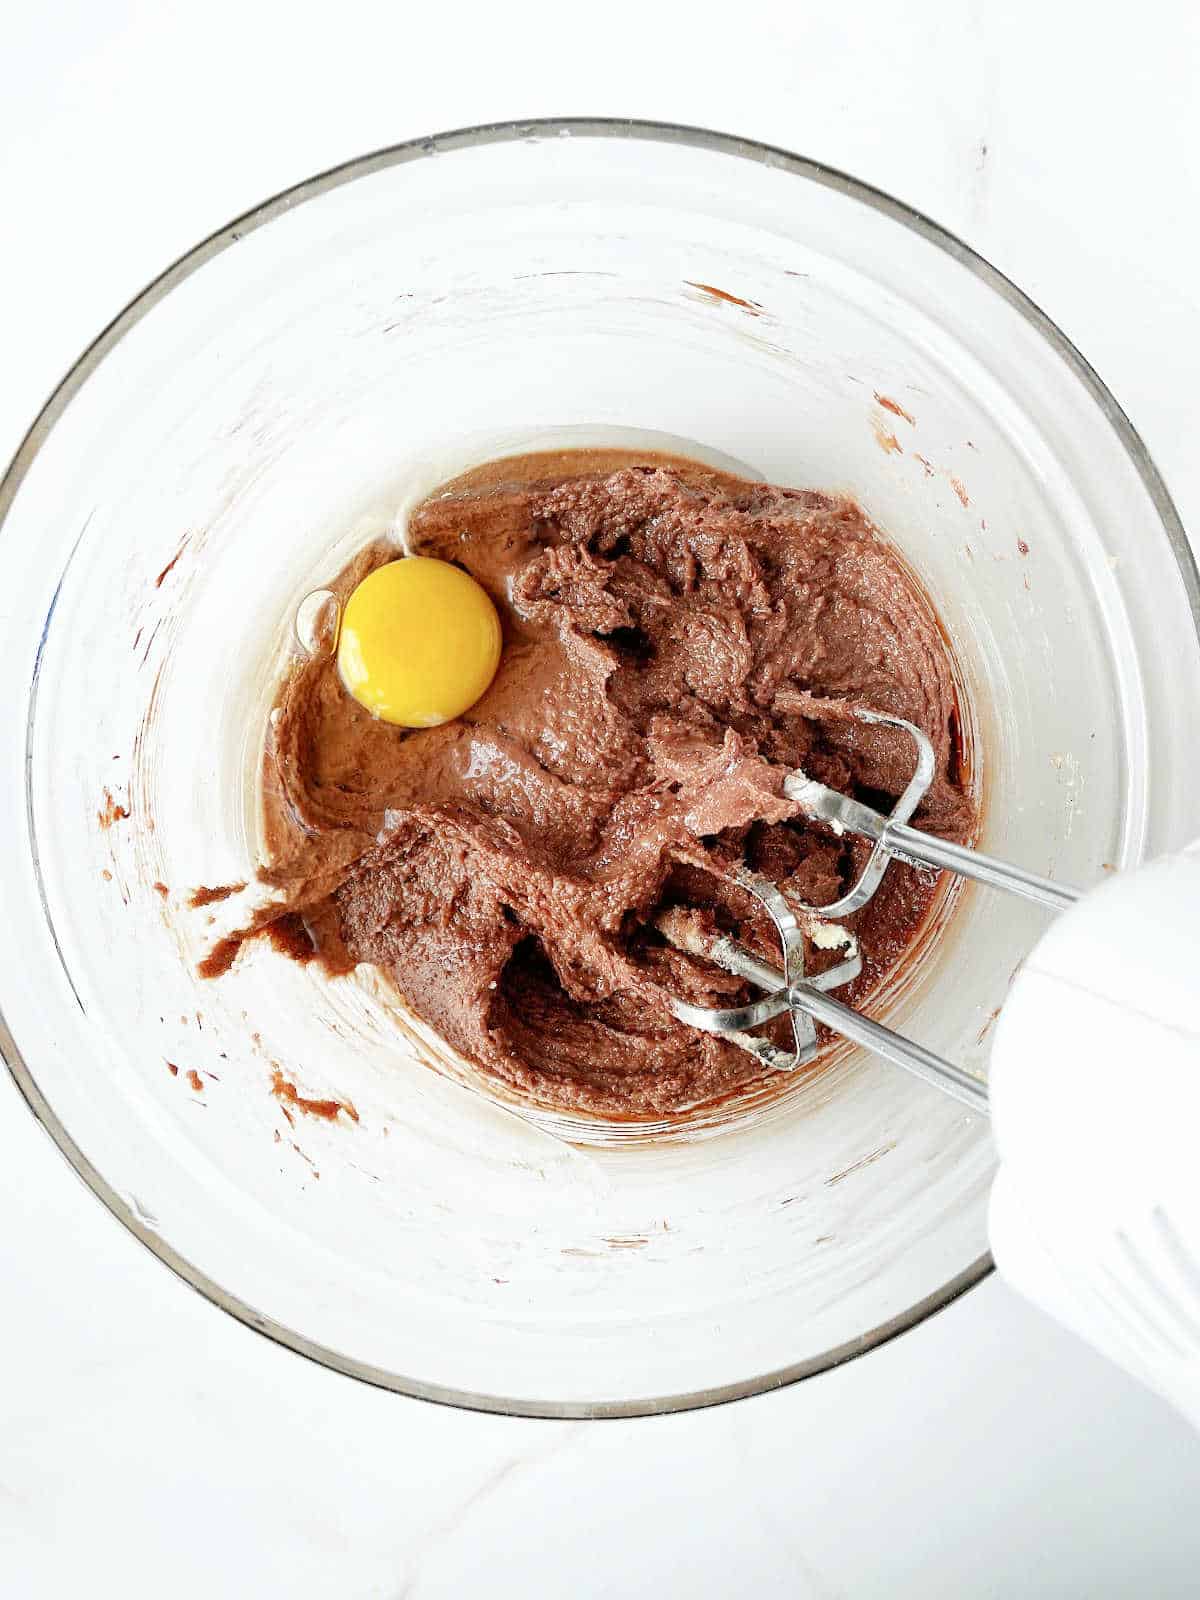 Egg added to chocolate cookie batter in a glass bowl with an electric mixer. White surface.